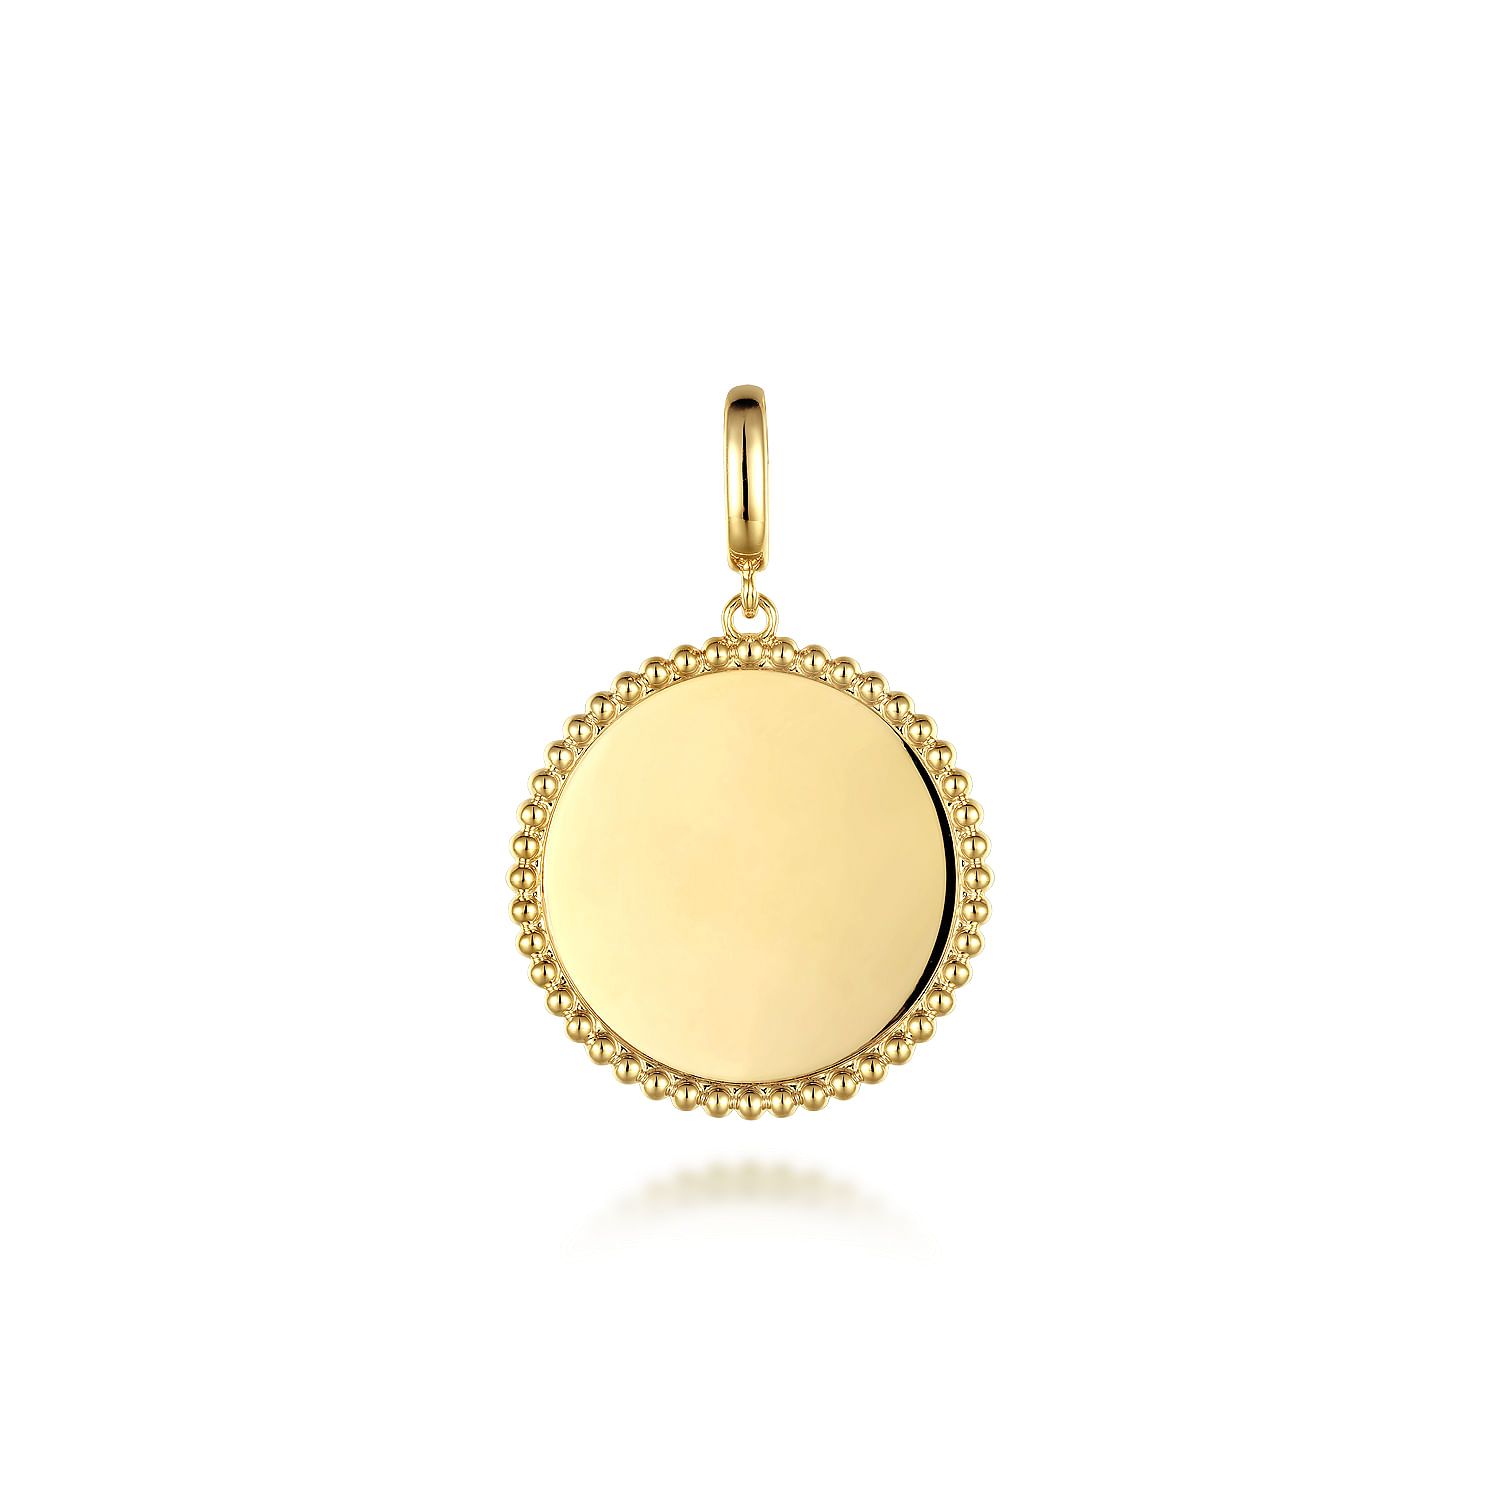 Gabriel - 14K Yellow Gold Bujukan Round Personalized Medallion Pendant in size 24mm